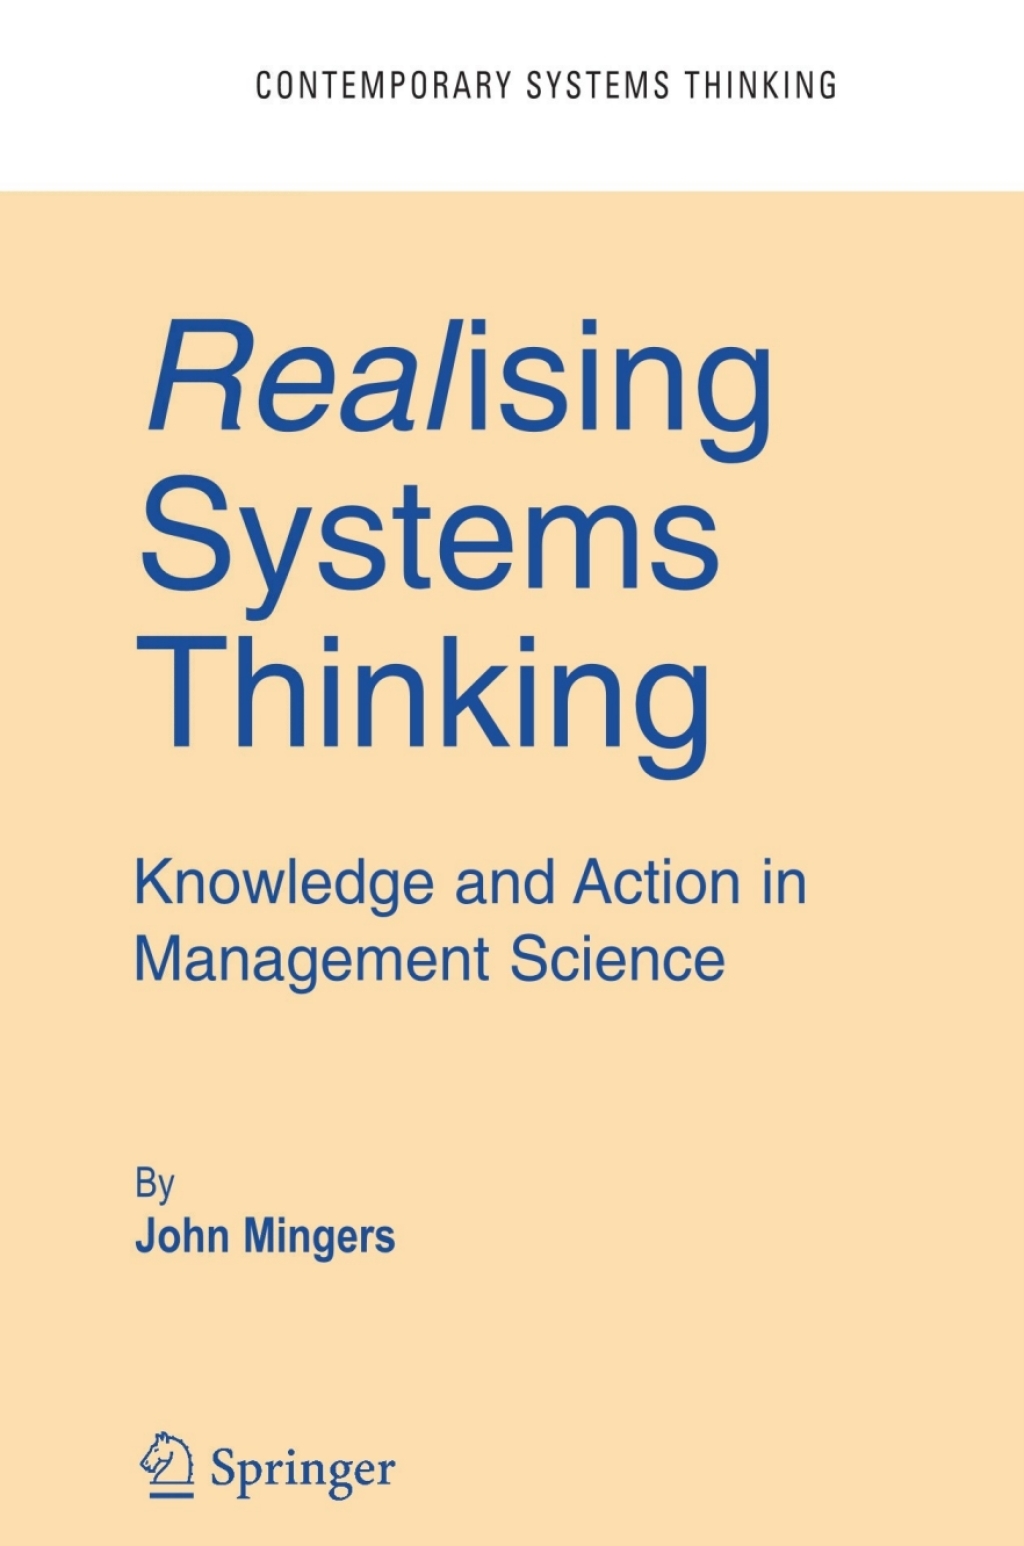 Realising Systems Thinking: Knowledge and Action in Management Science (eBook) - John Mingers,